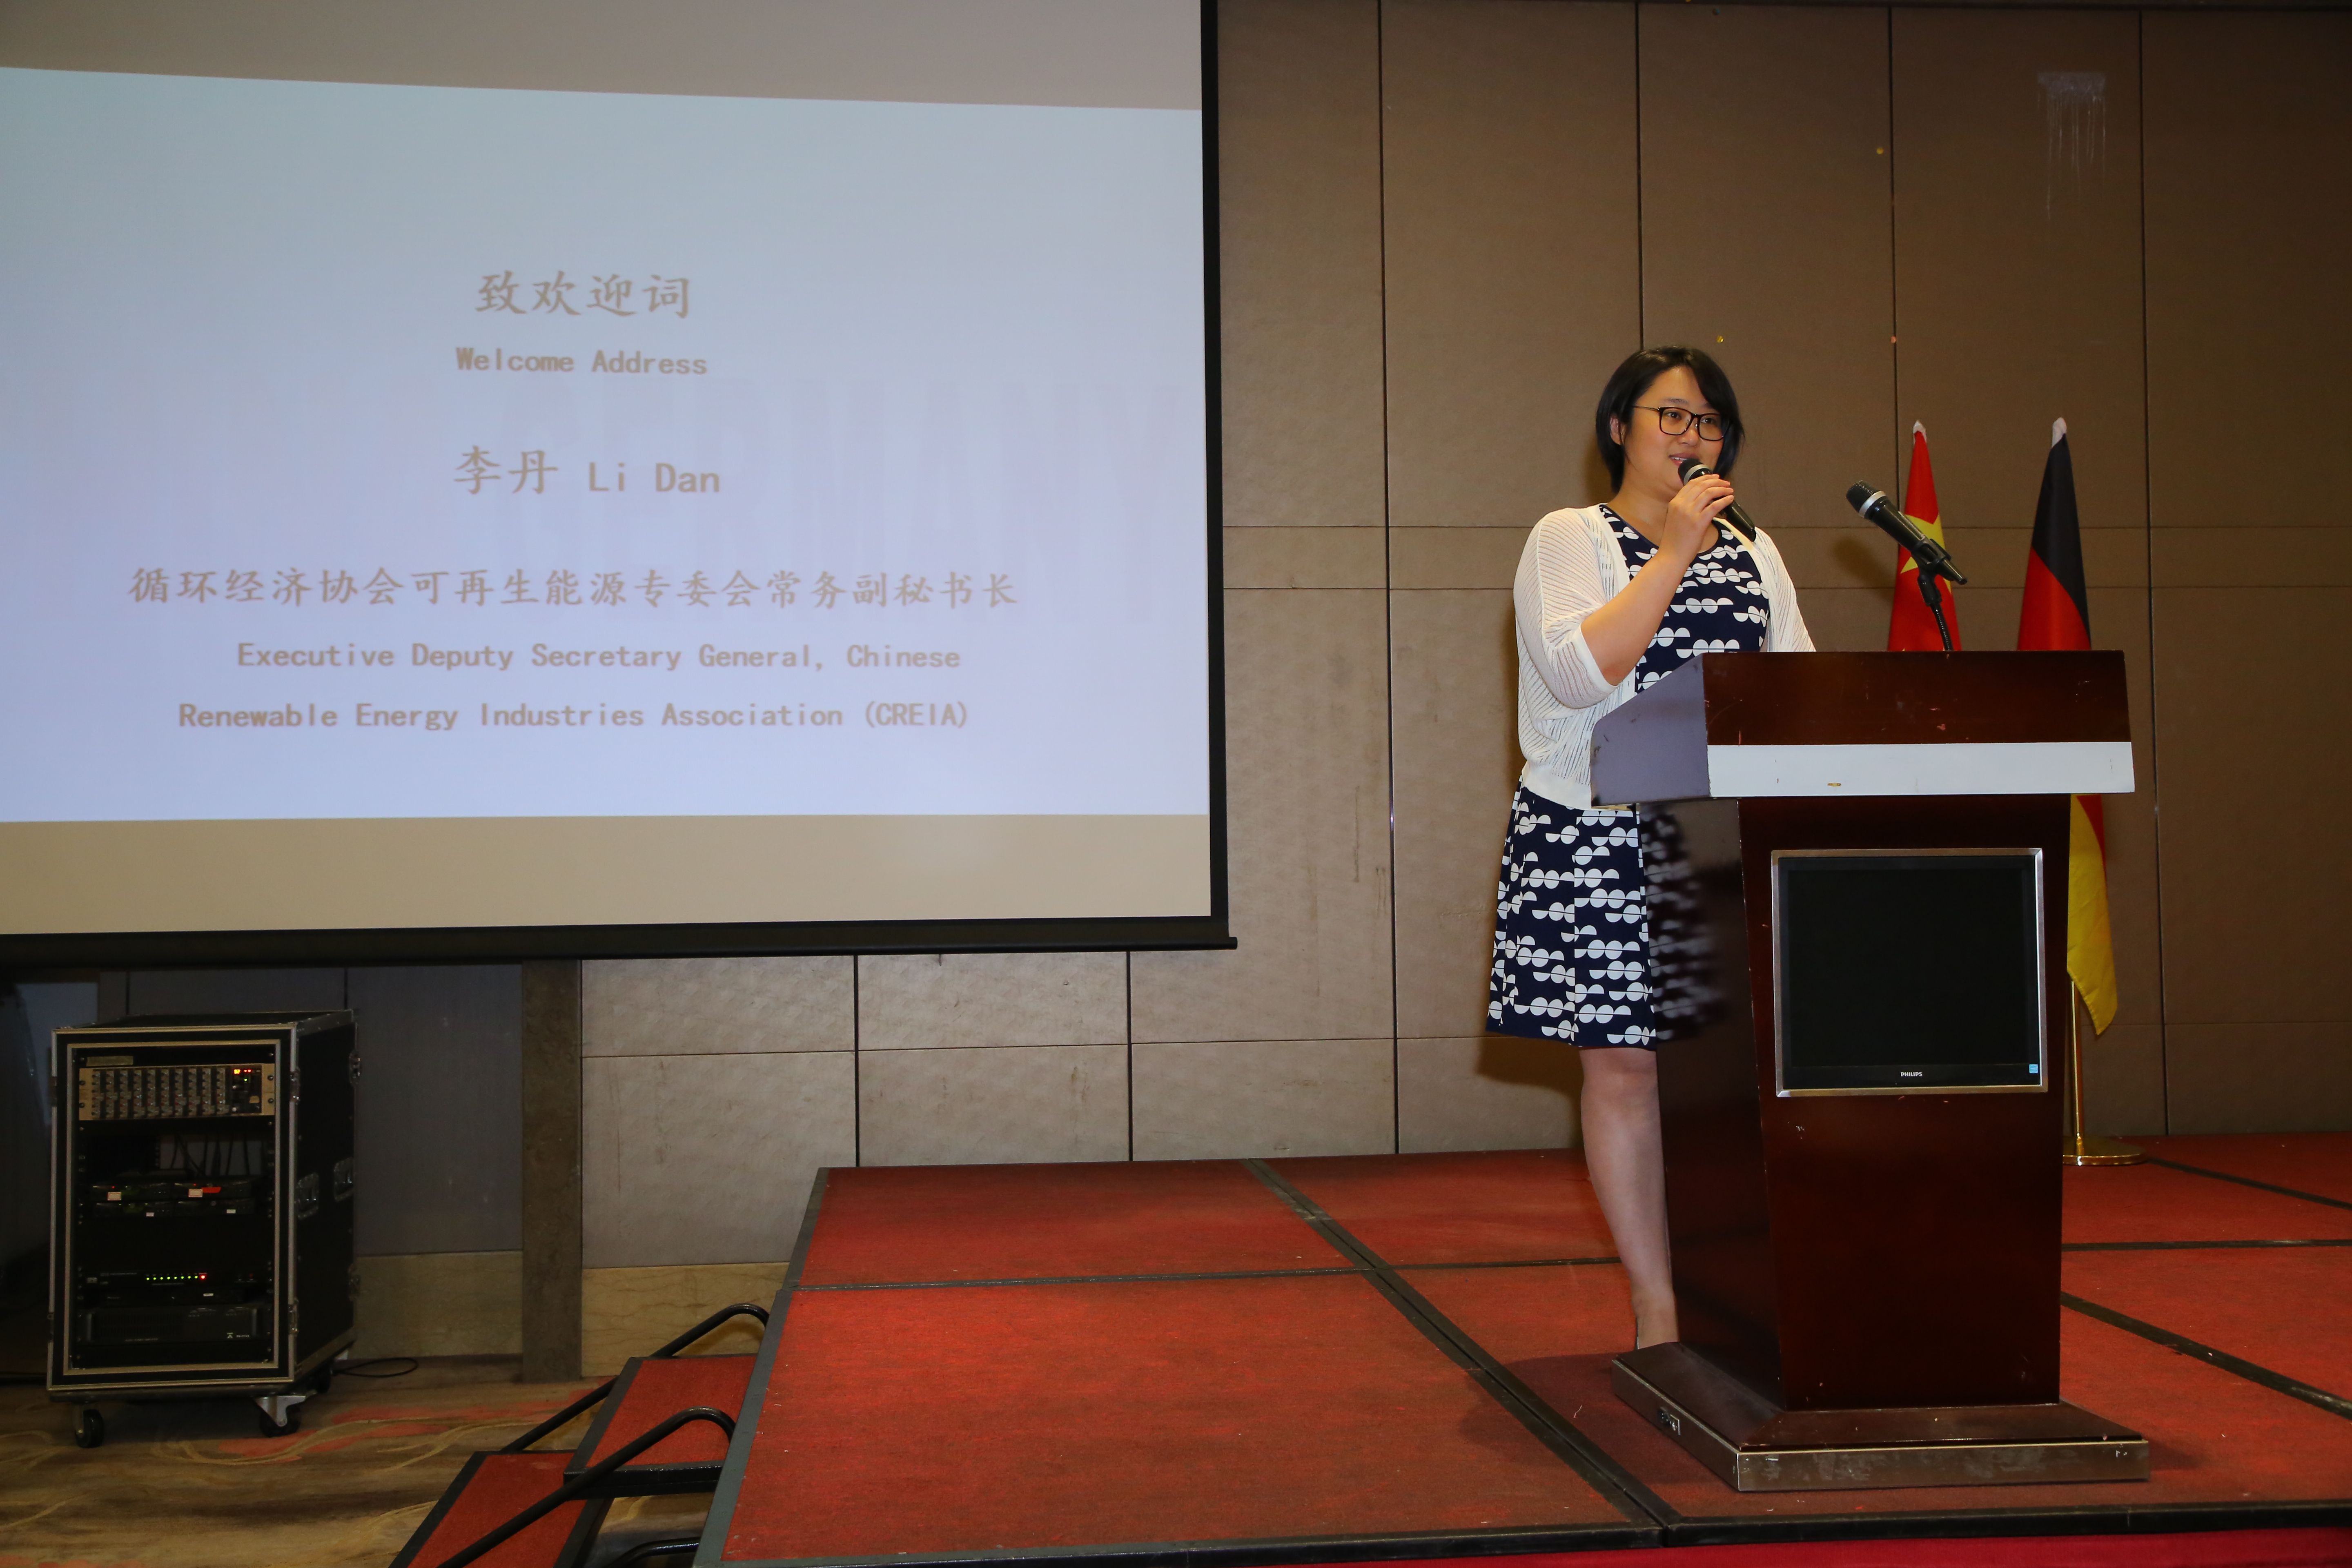 Ms. Li Dan, executive vice secretary-general of Chinese Renewable Energy Industries Association (CREIA) giving the opening speech during the roundtable event, ©CWEA 